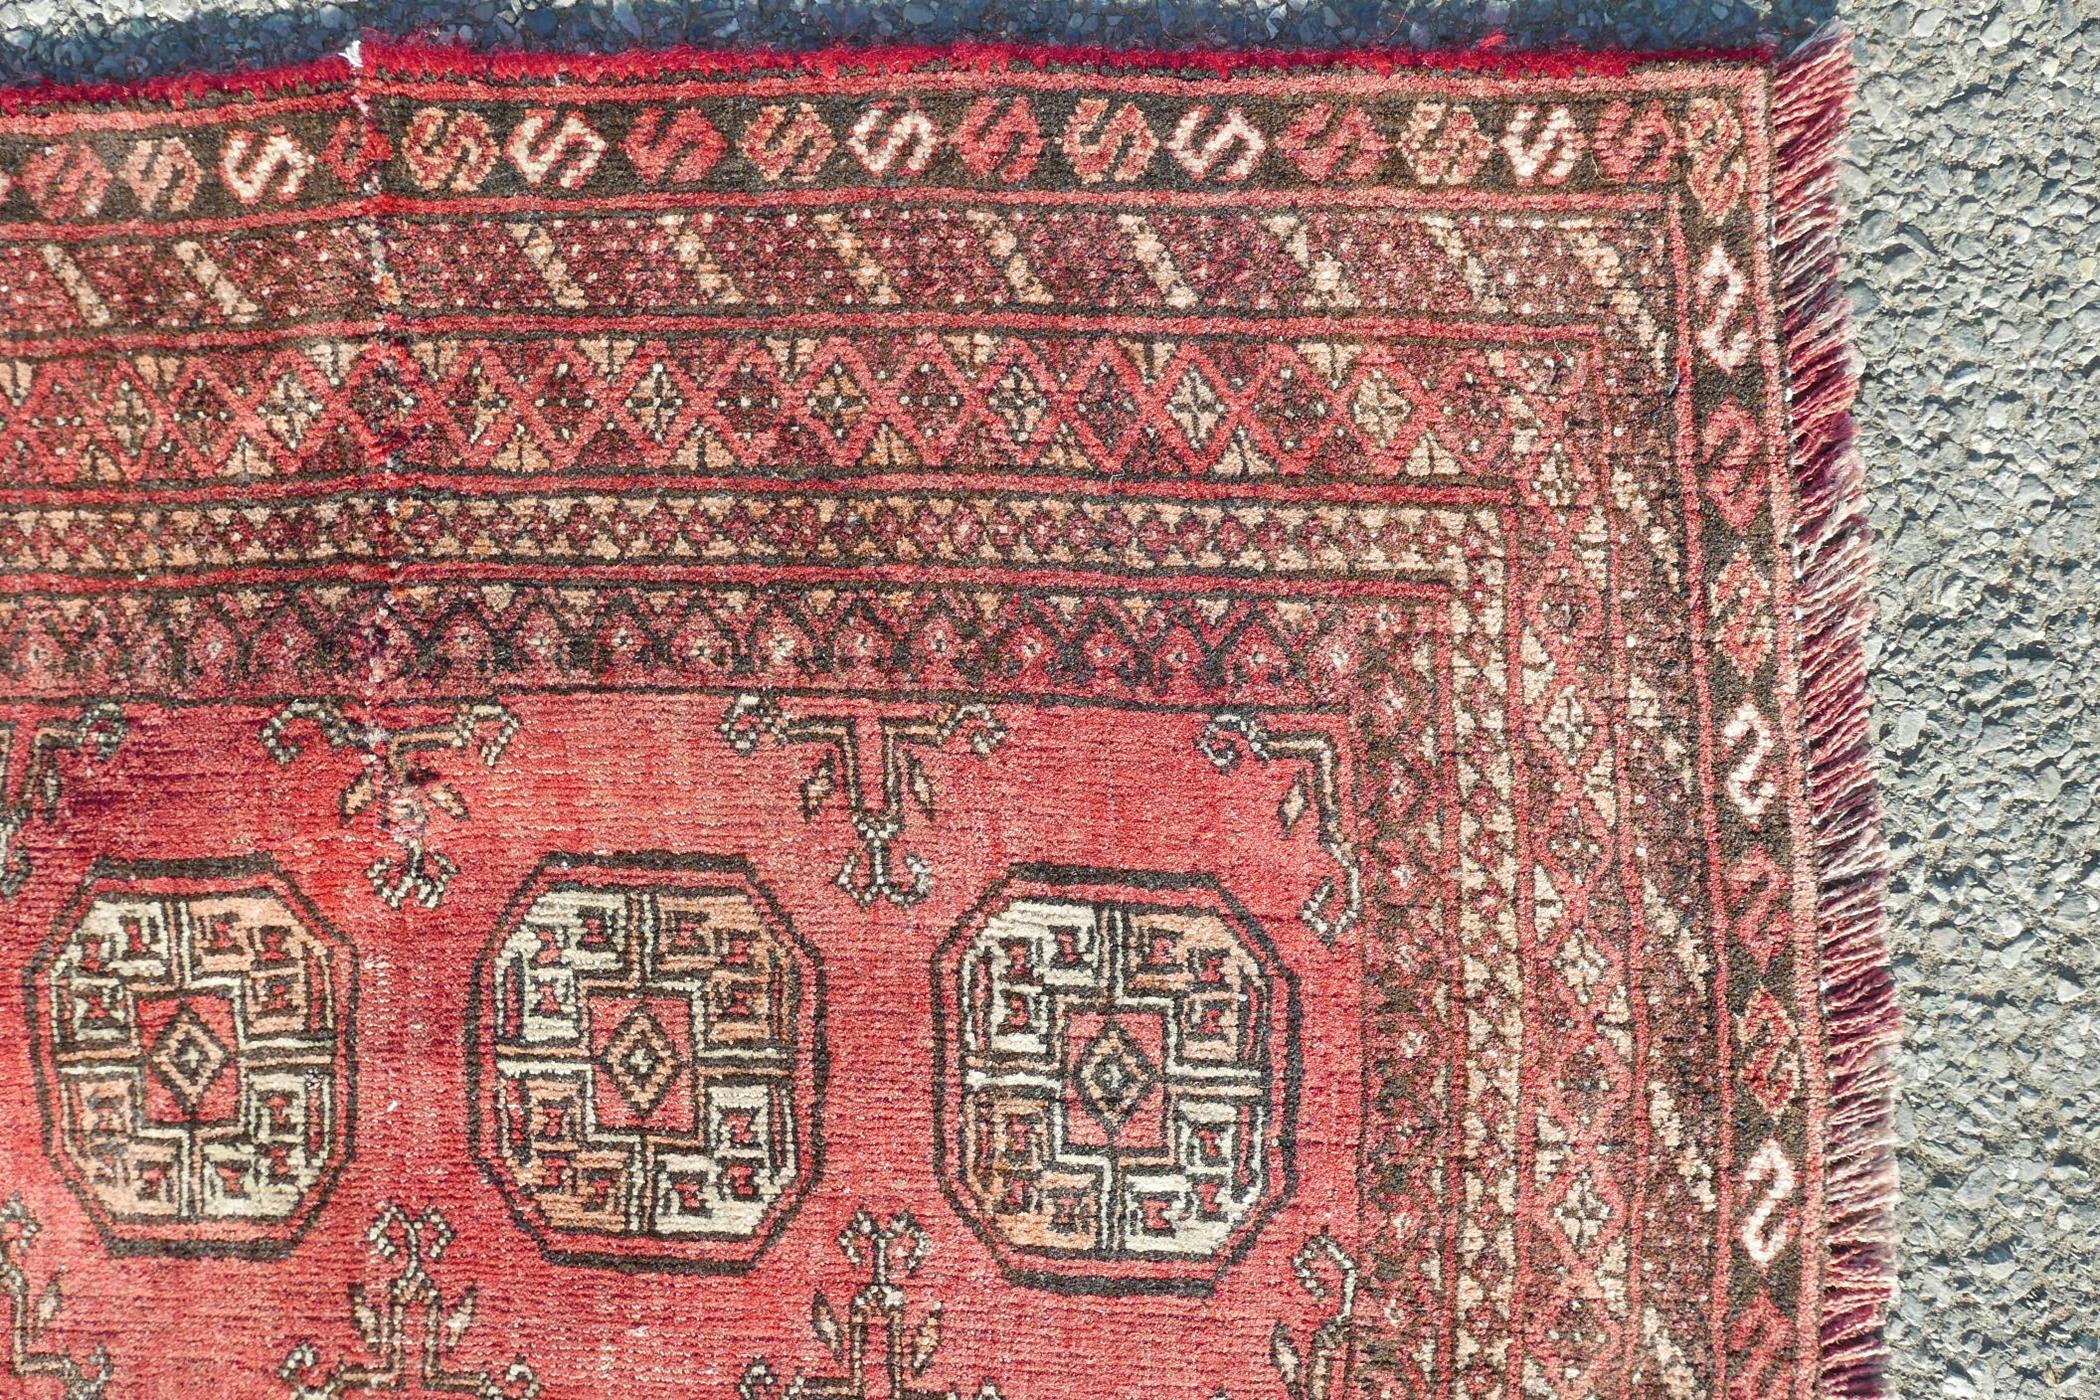 A washed red ground Turkmen carpet with a Bokhara design, repairs, 56" x 90" - Image 5 of 6